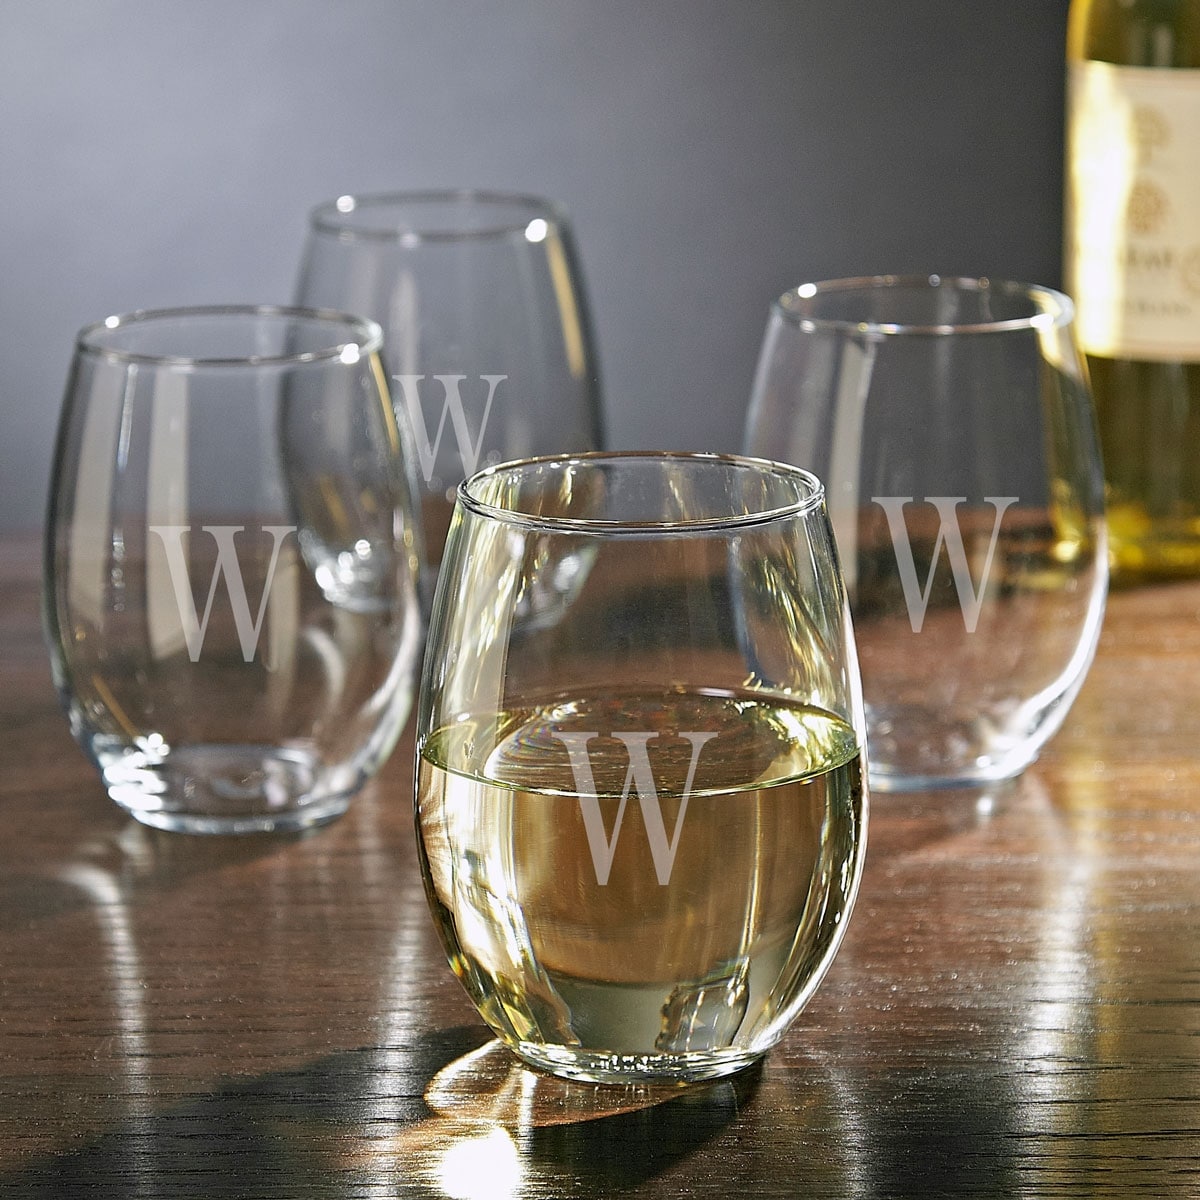 https://ak1.ostkcdn.com/images/products/is/images/direct/79986143a5aa09fa1c16b3d1bf9dd32be4ef4539/Personalized-Stemless-White-Wine-Glasses%2C-Set-of-4.jpg